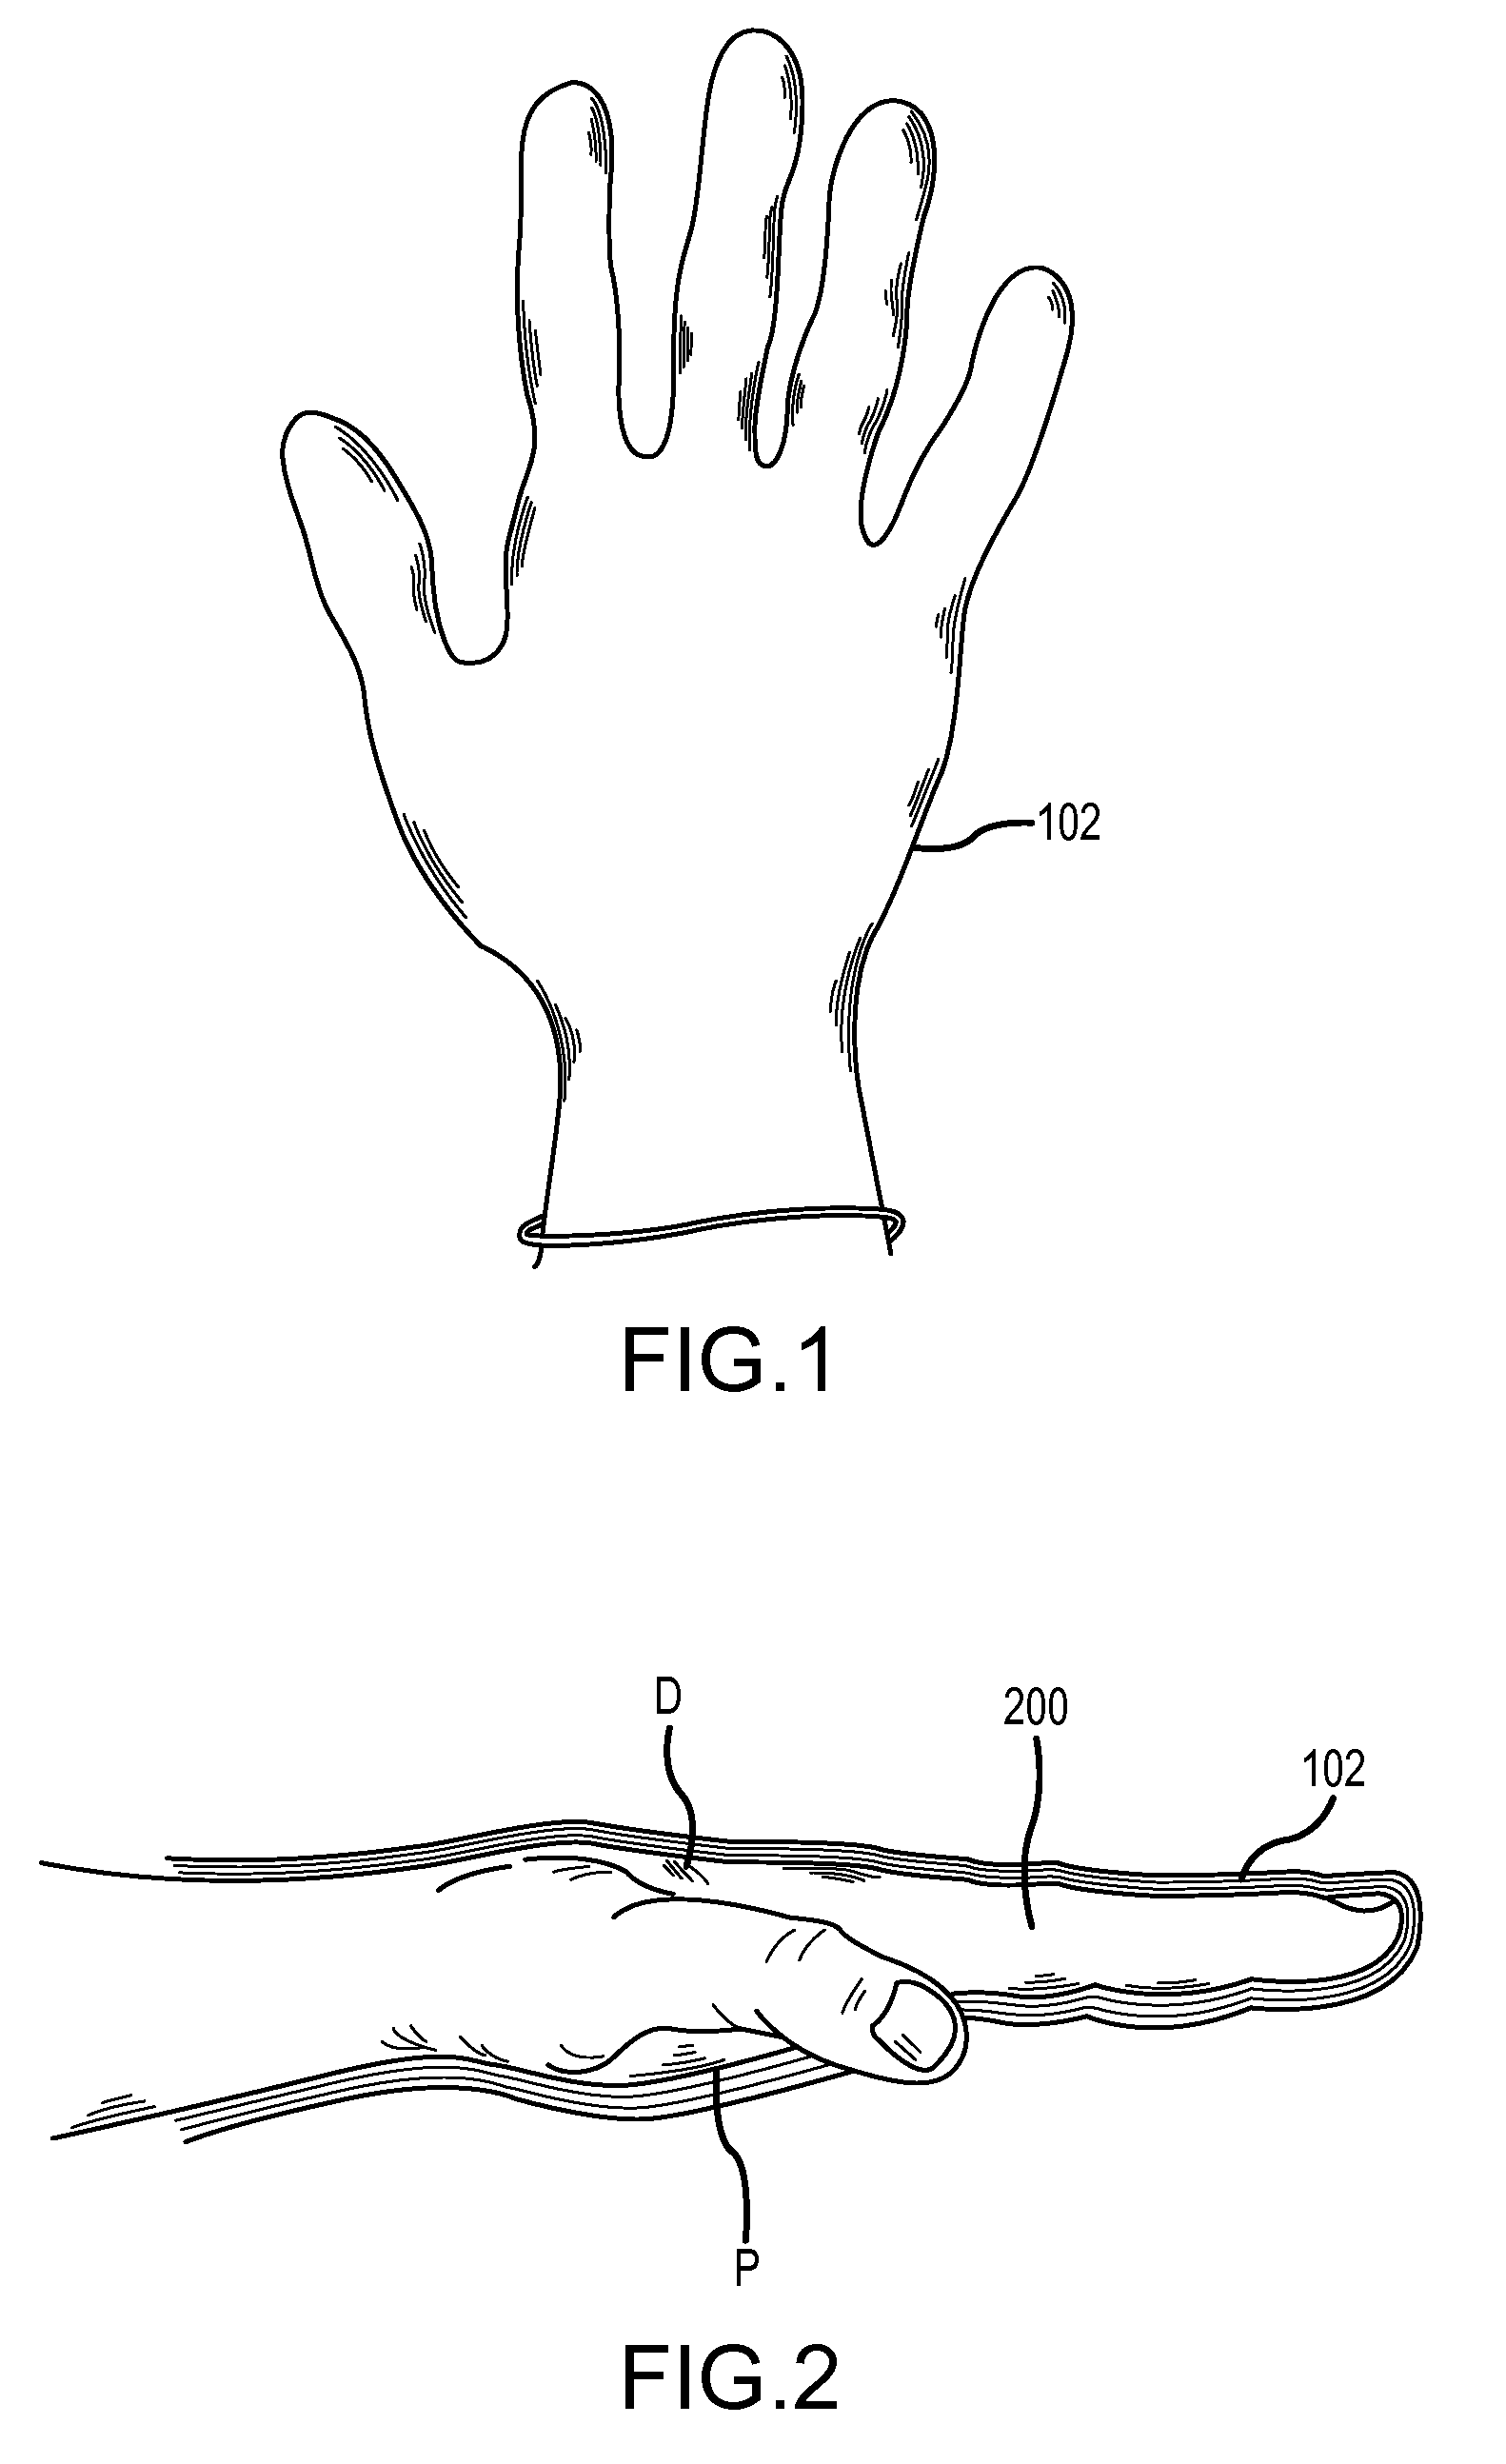 Surgical glove with ergonomic features